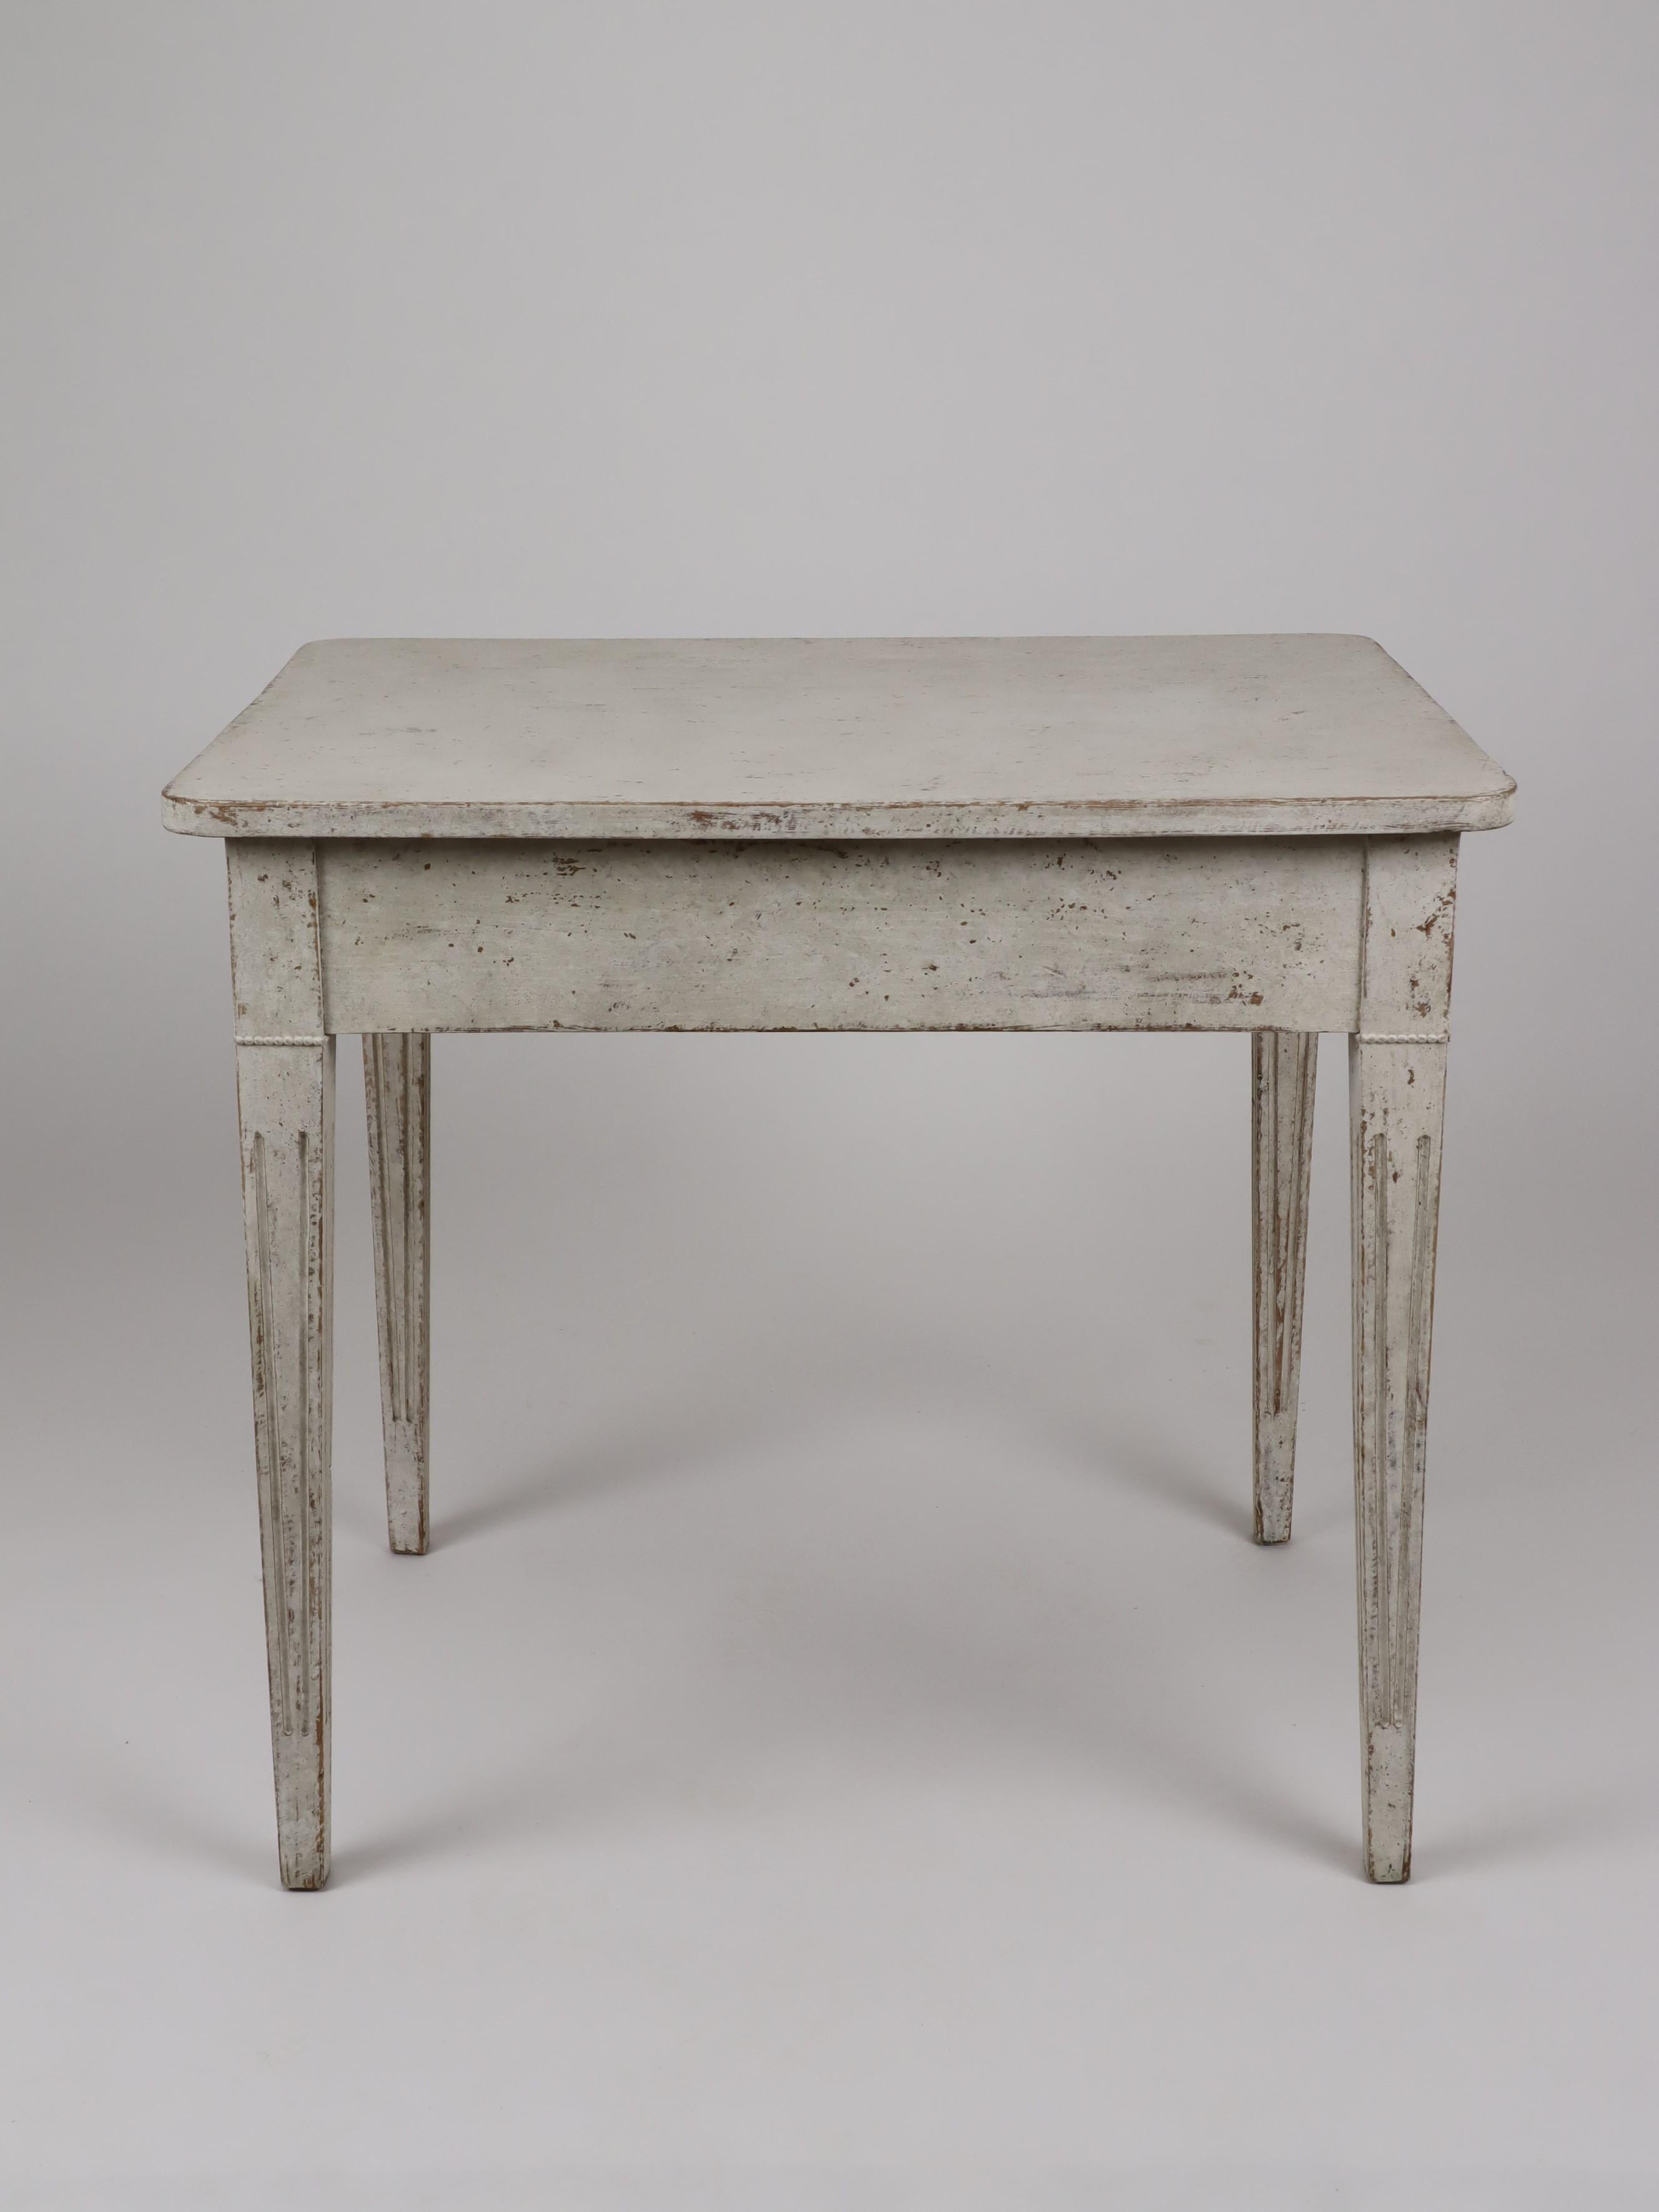 Swedish Gustavian Style 1850s Painted Desk with Single Drawer and Tapered Legs For Sale 4